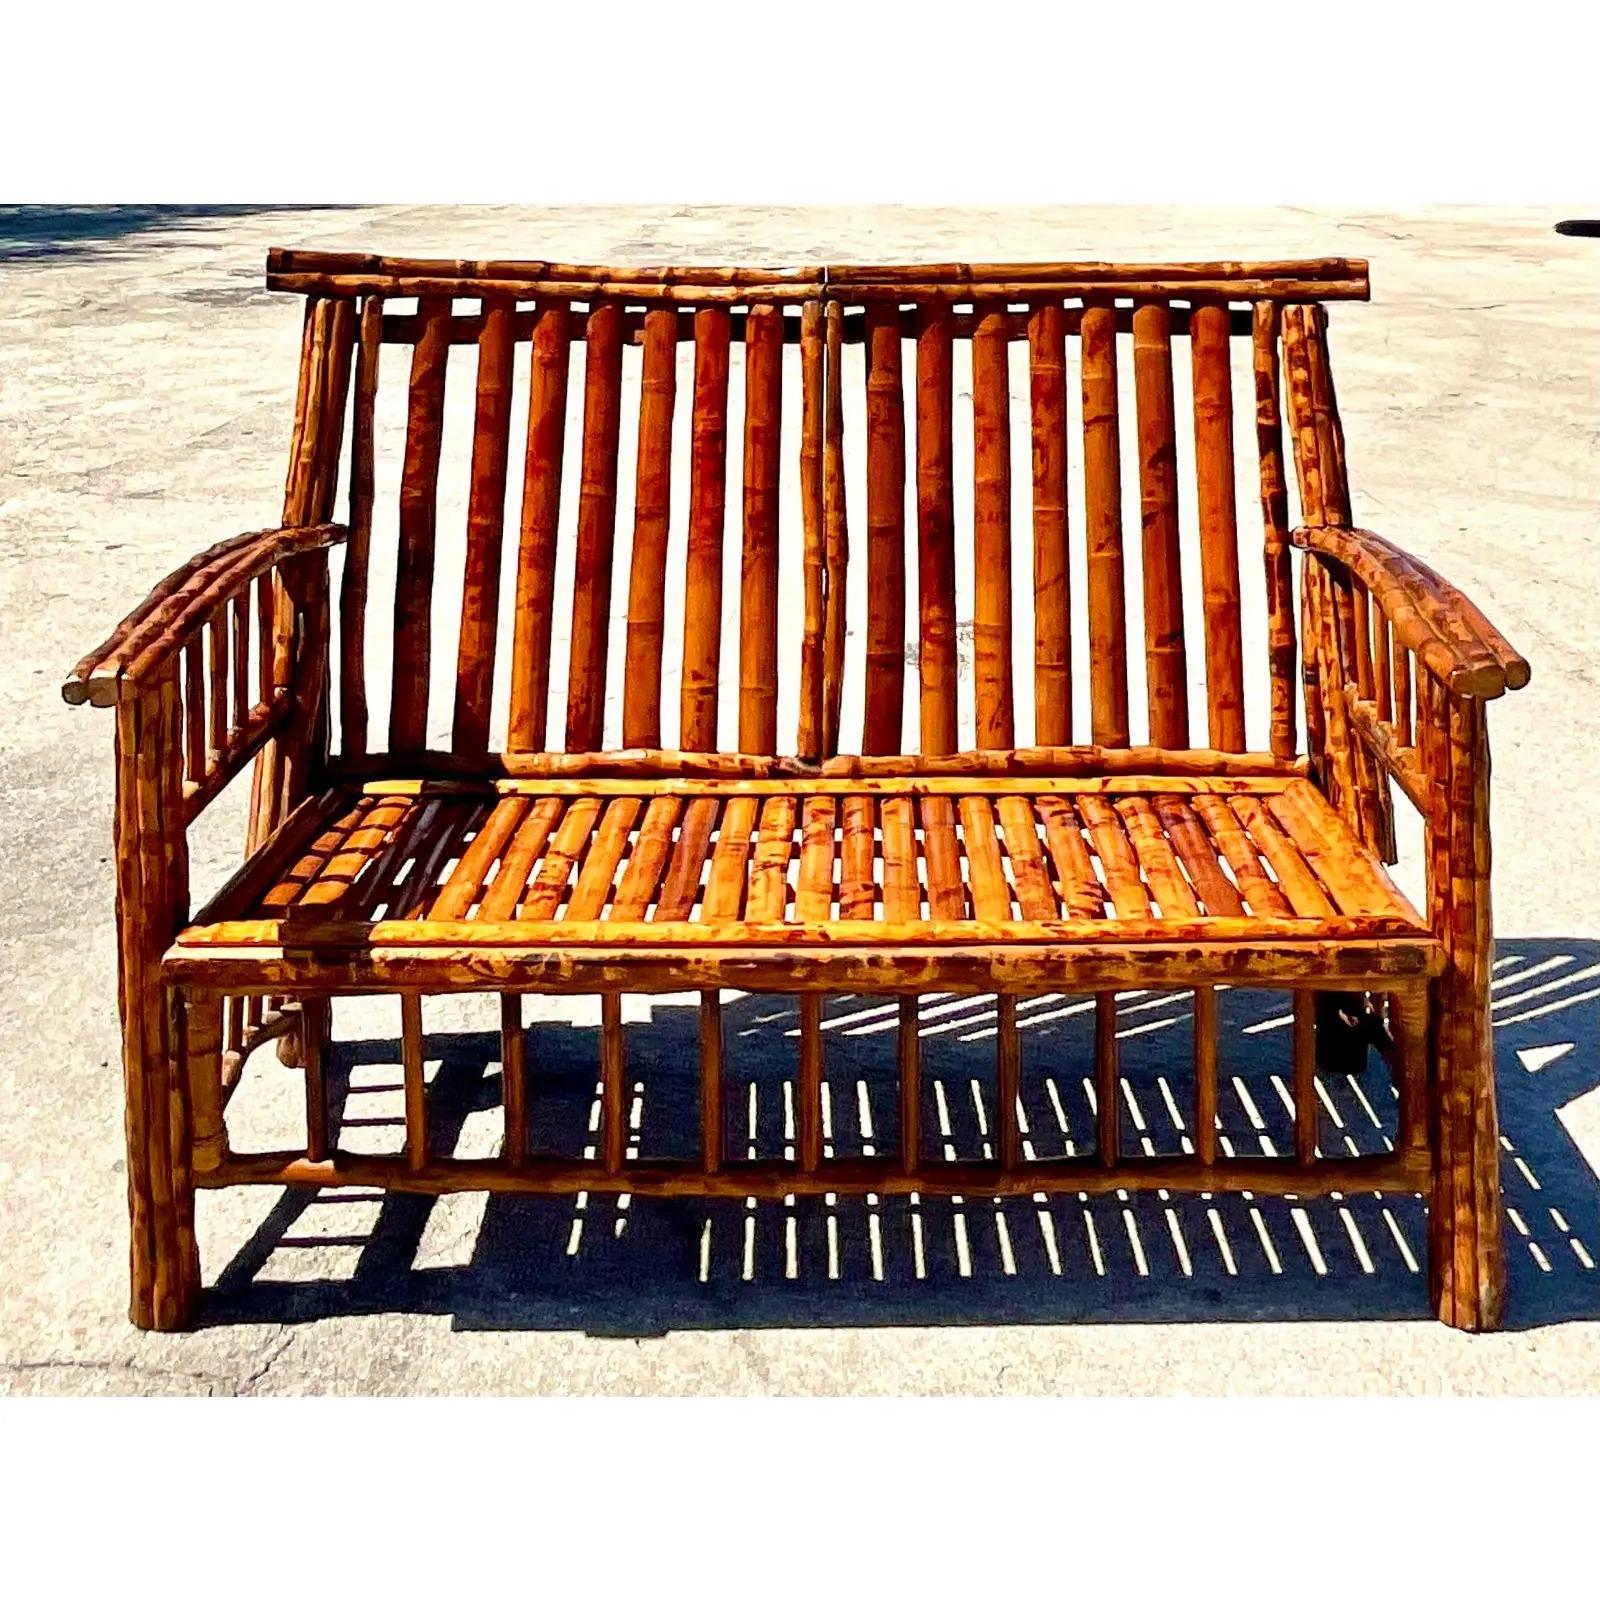 Fantastic vintage Coastal Tortoise shell bamboo bench. Beautiful deep rich browns and tans on a classic rustic design. Great to add a little glamour to any space. Acquired from a Palm Beach estate.